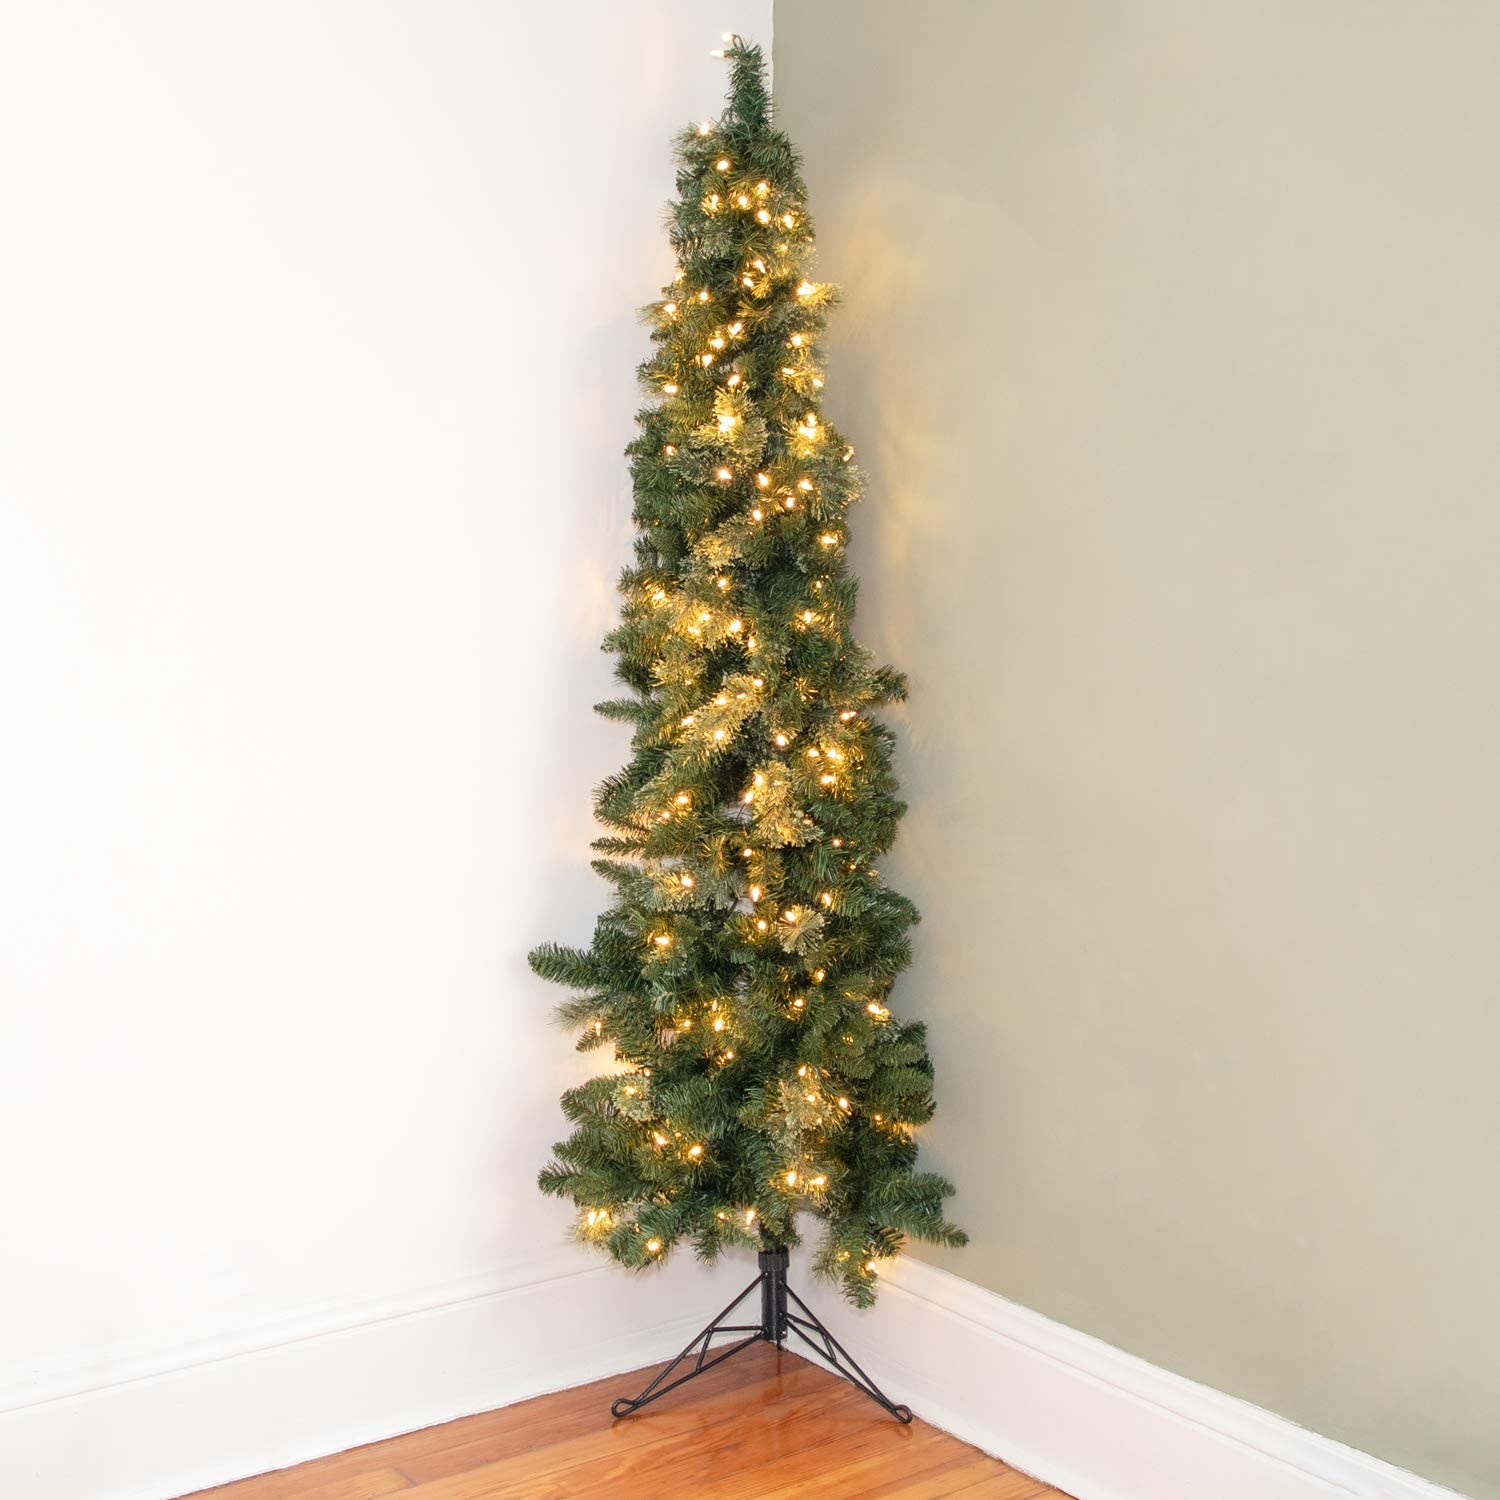 Flat Wall Mounted Christmas Trees Save Space In Smaller Homes